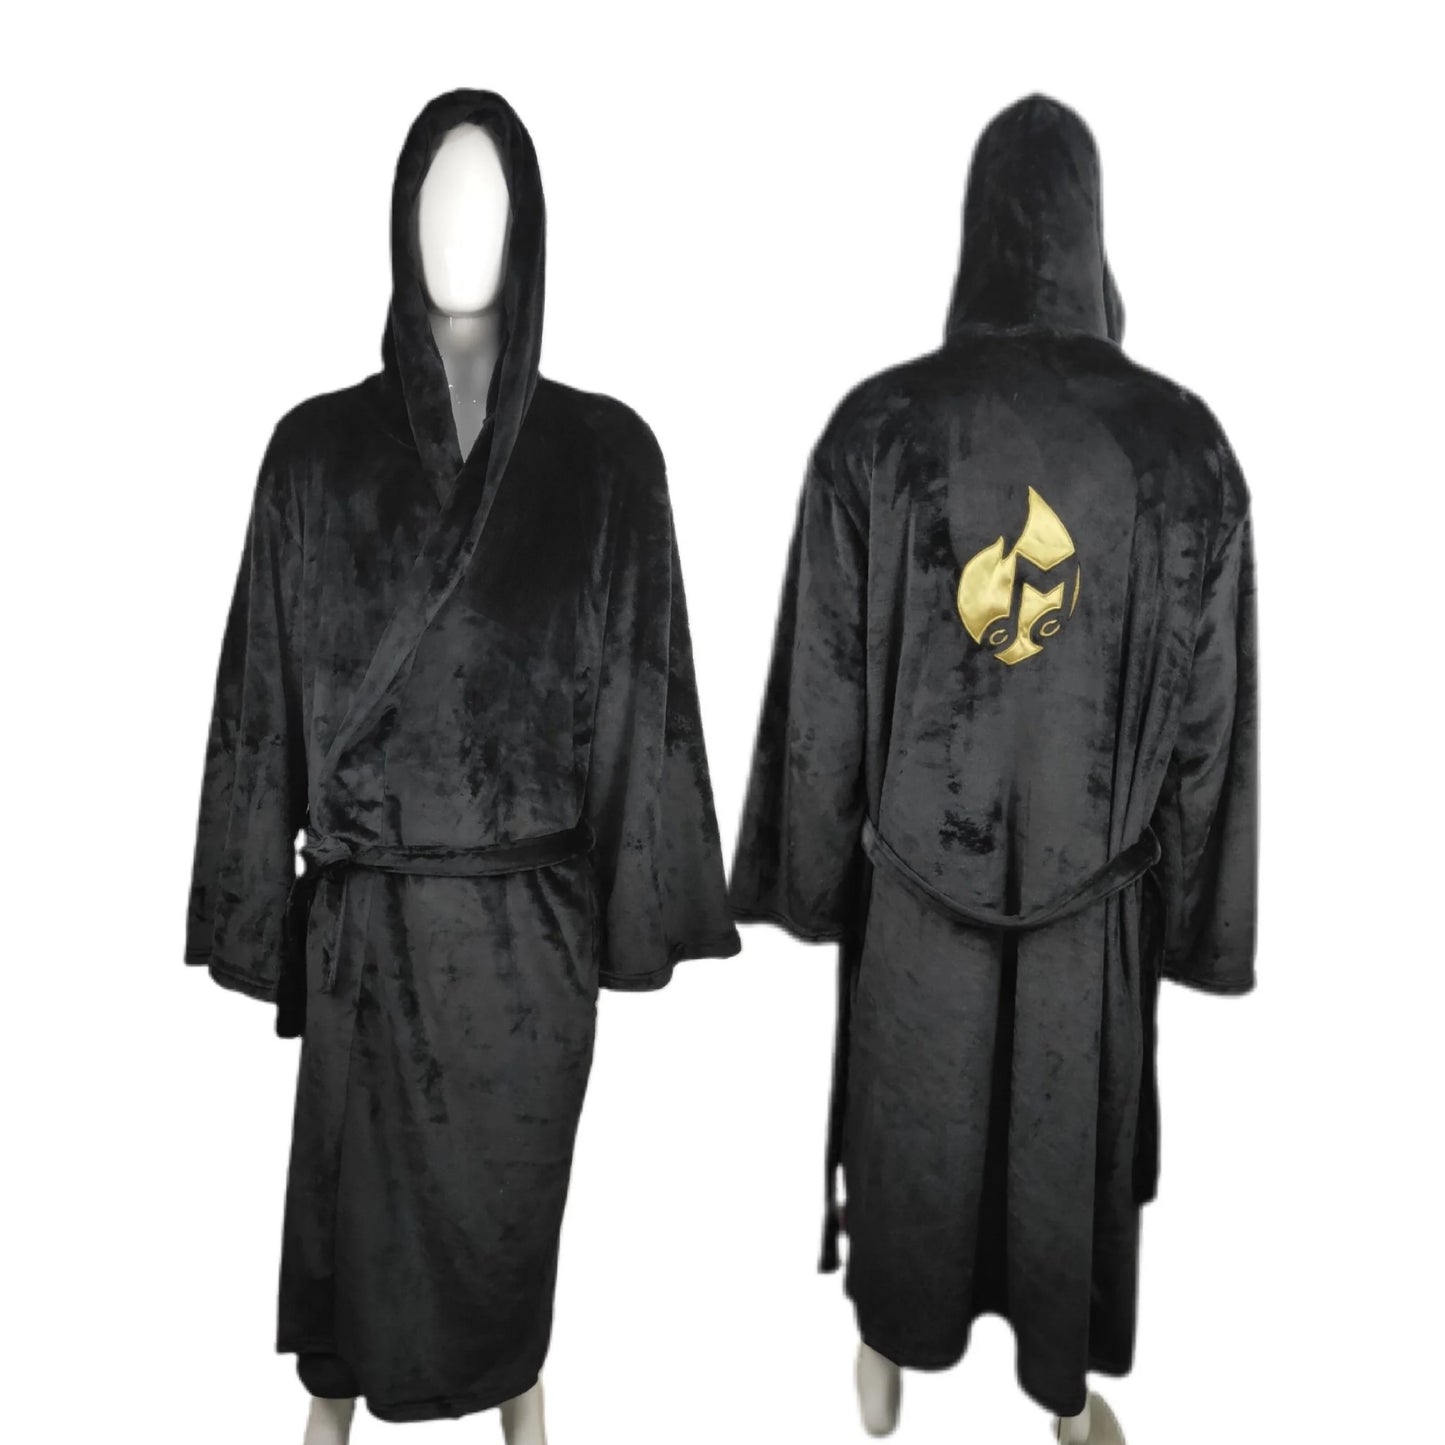 The “Players” Robe - House Of Wellness by MCC